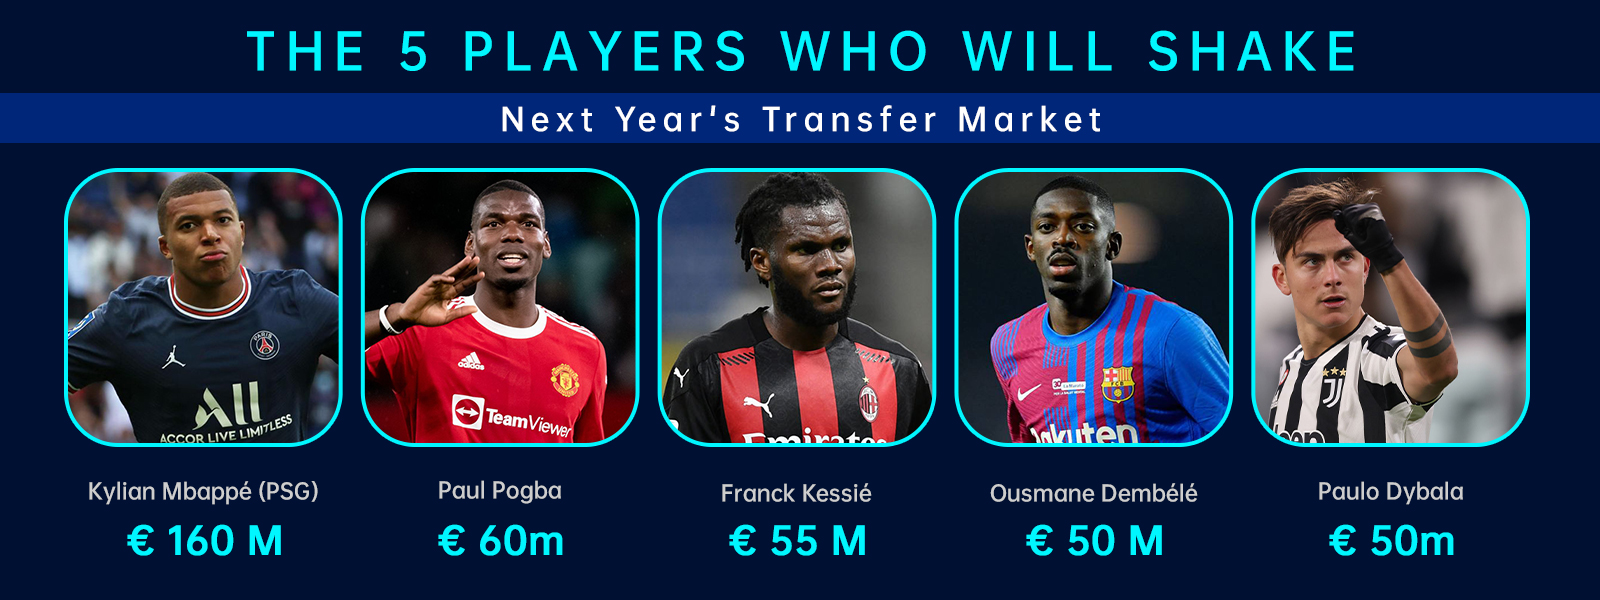 5 Players Who Will Shake Next Year's Transfer Market